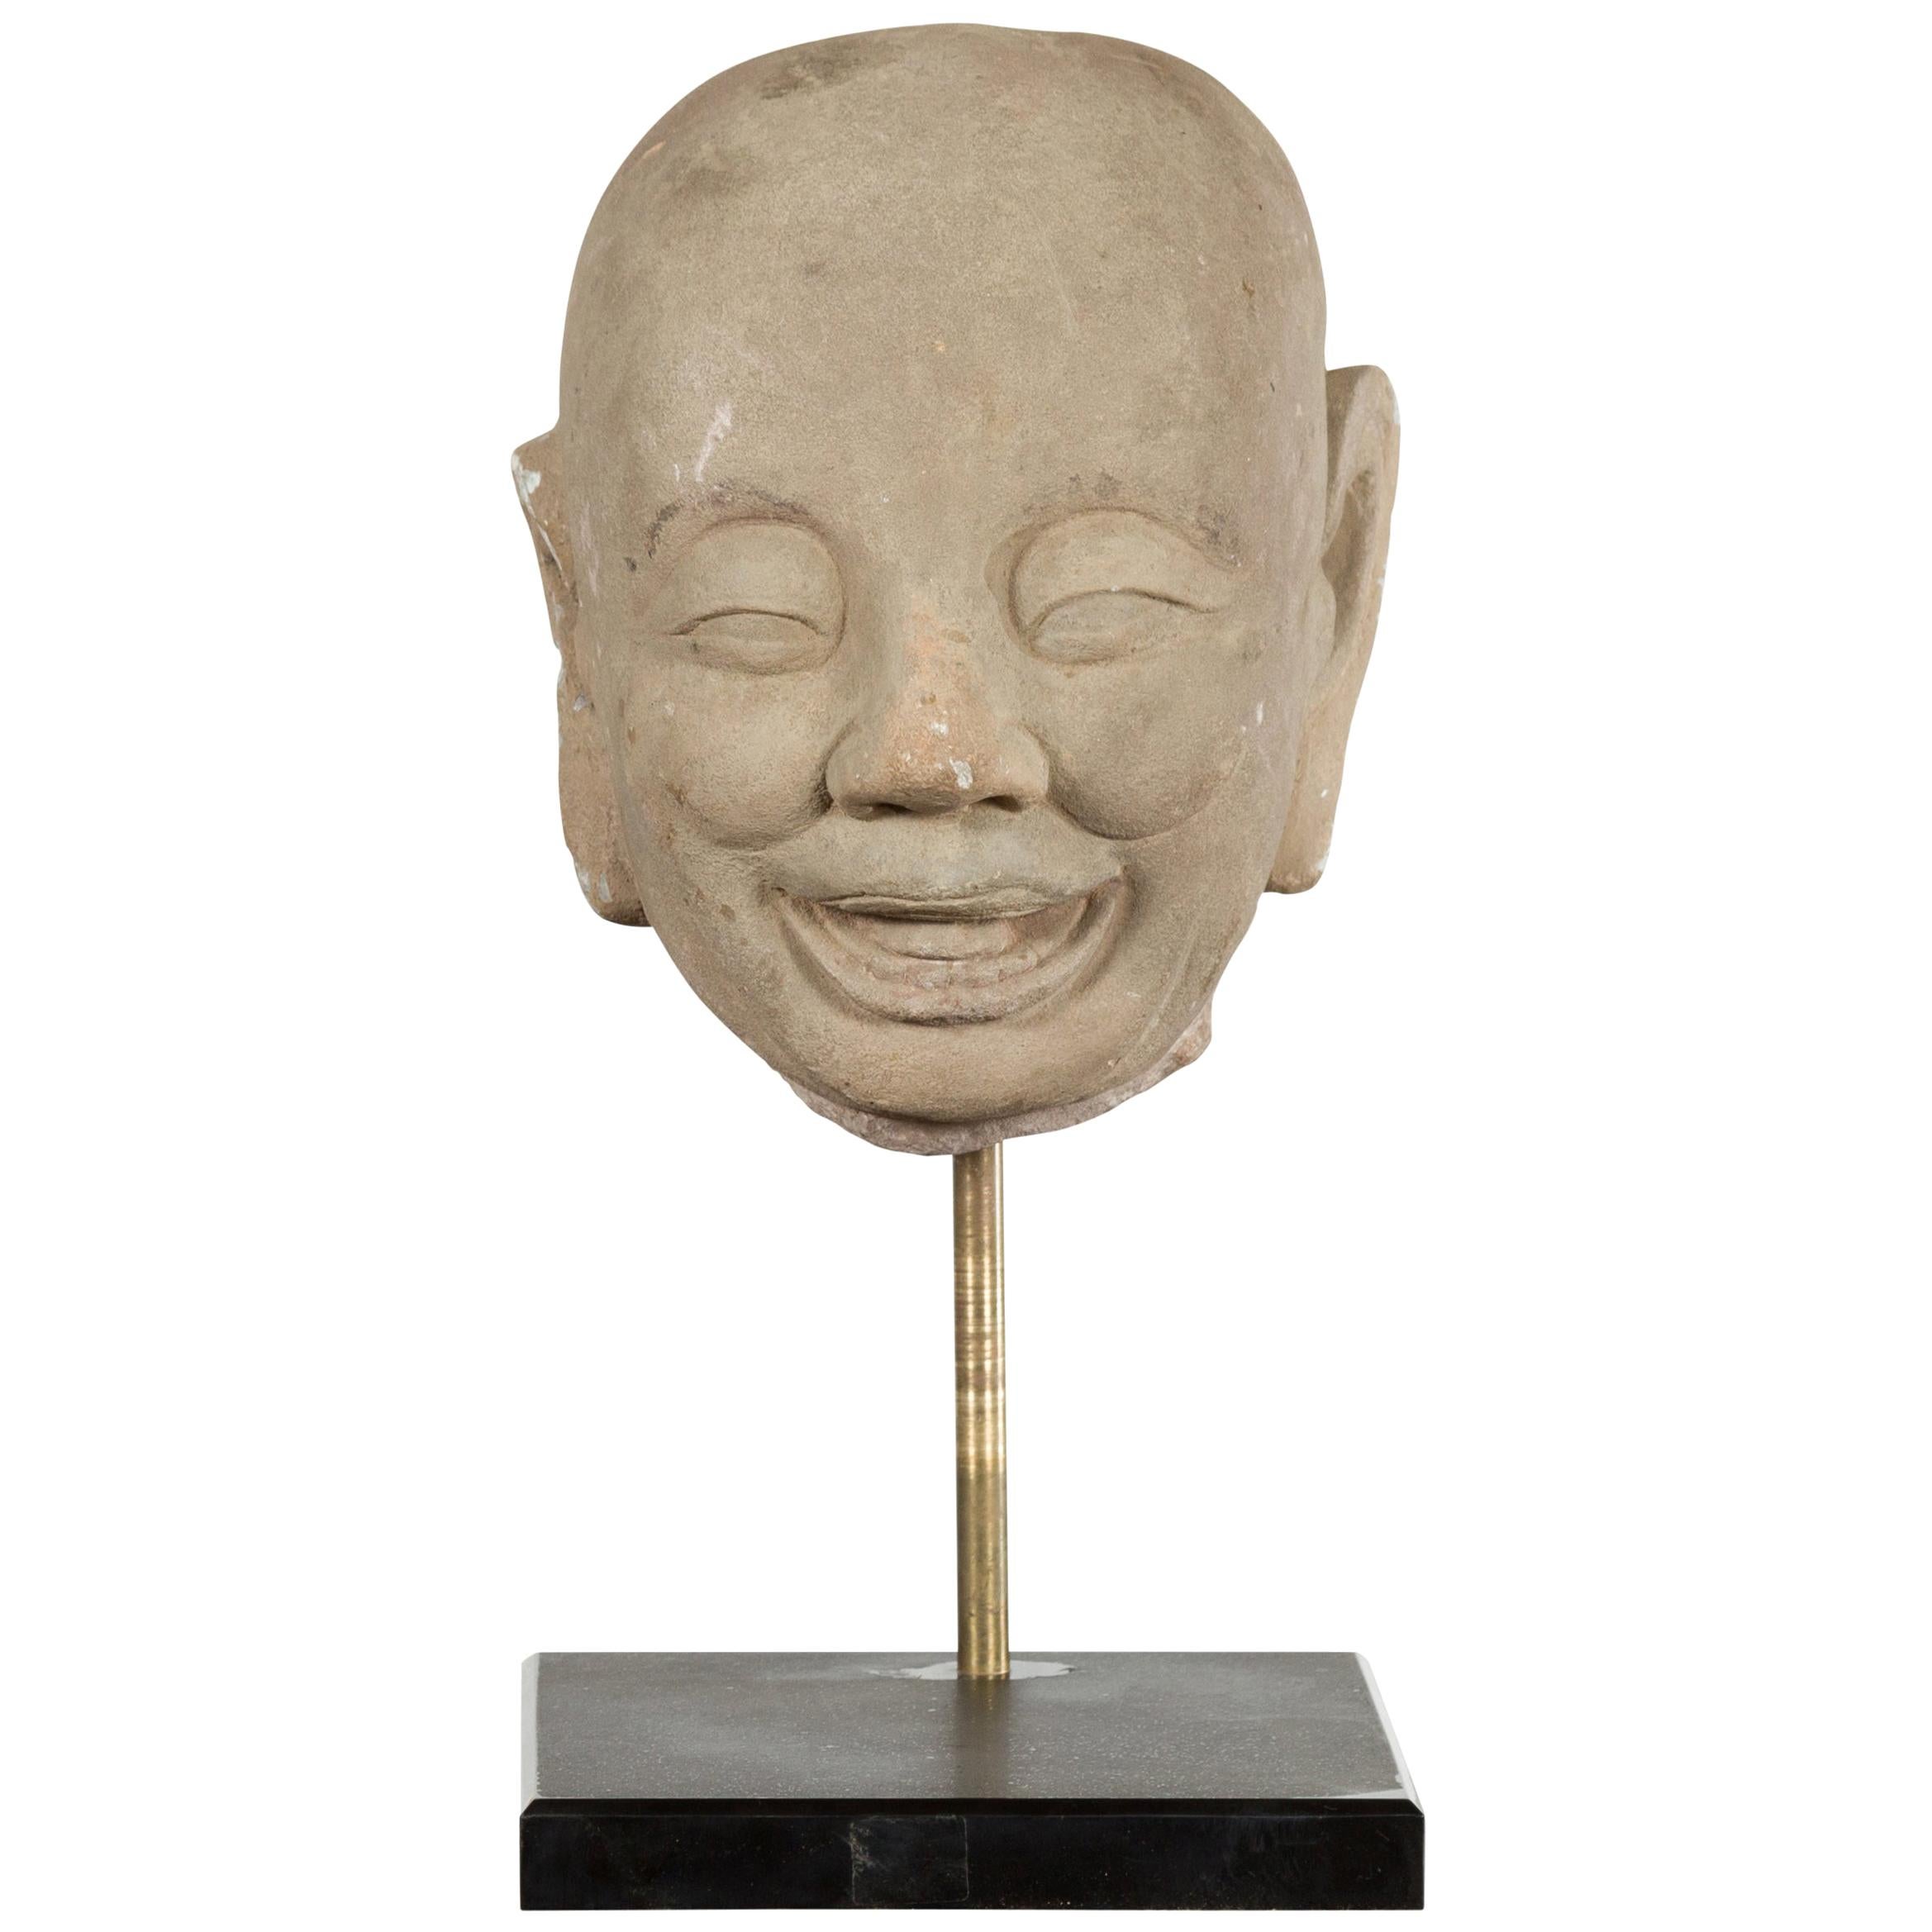 Chinese Song Dynasty Hand-Carved Limestone Head of a Lohan circa 960 to 1279 AD